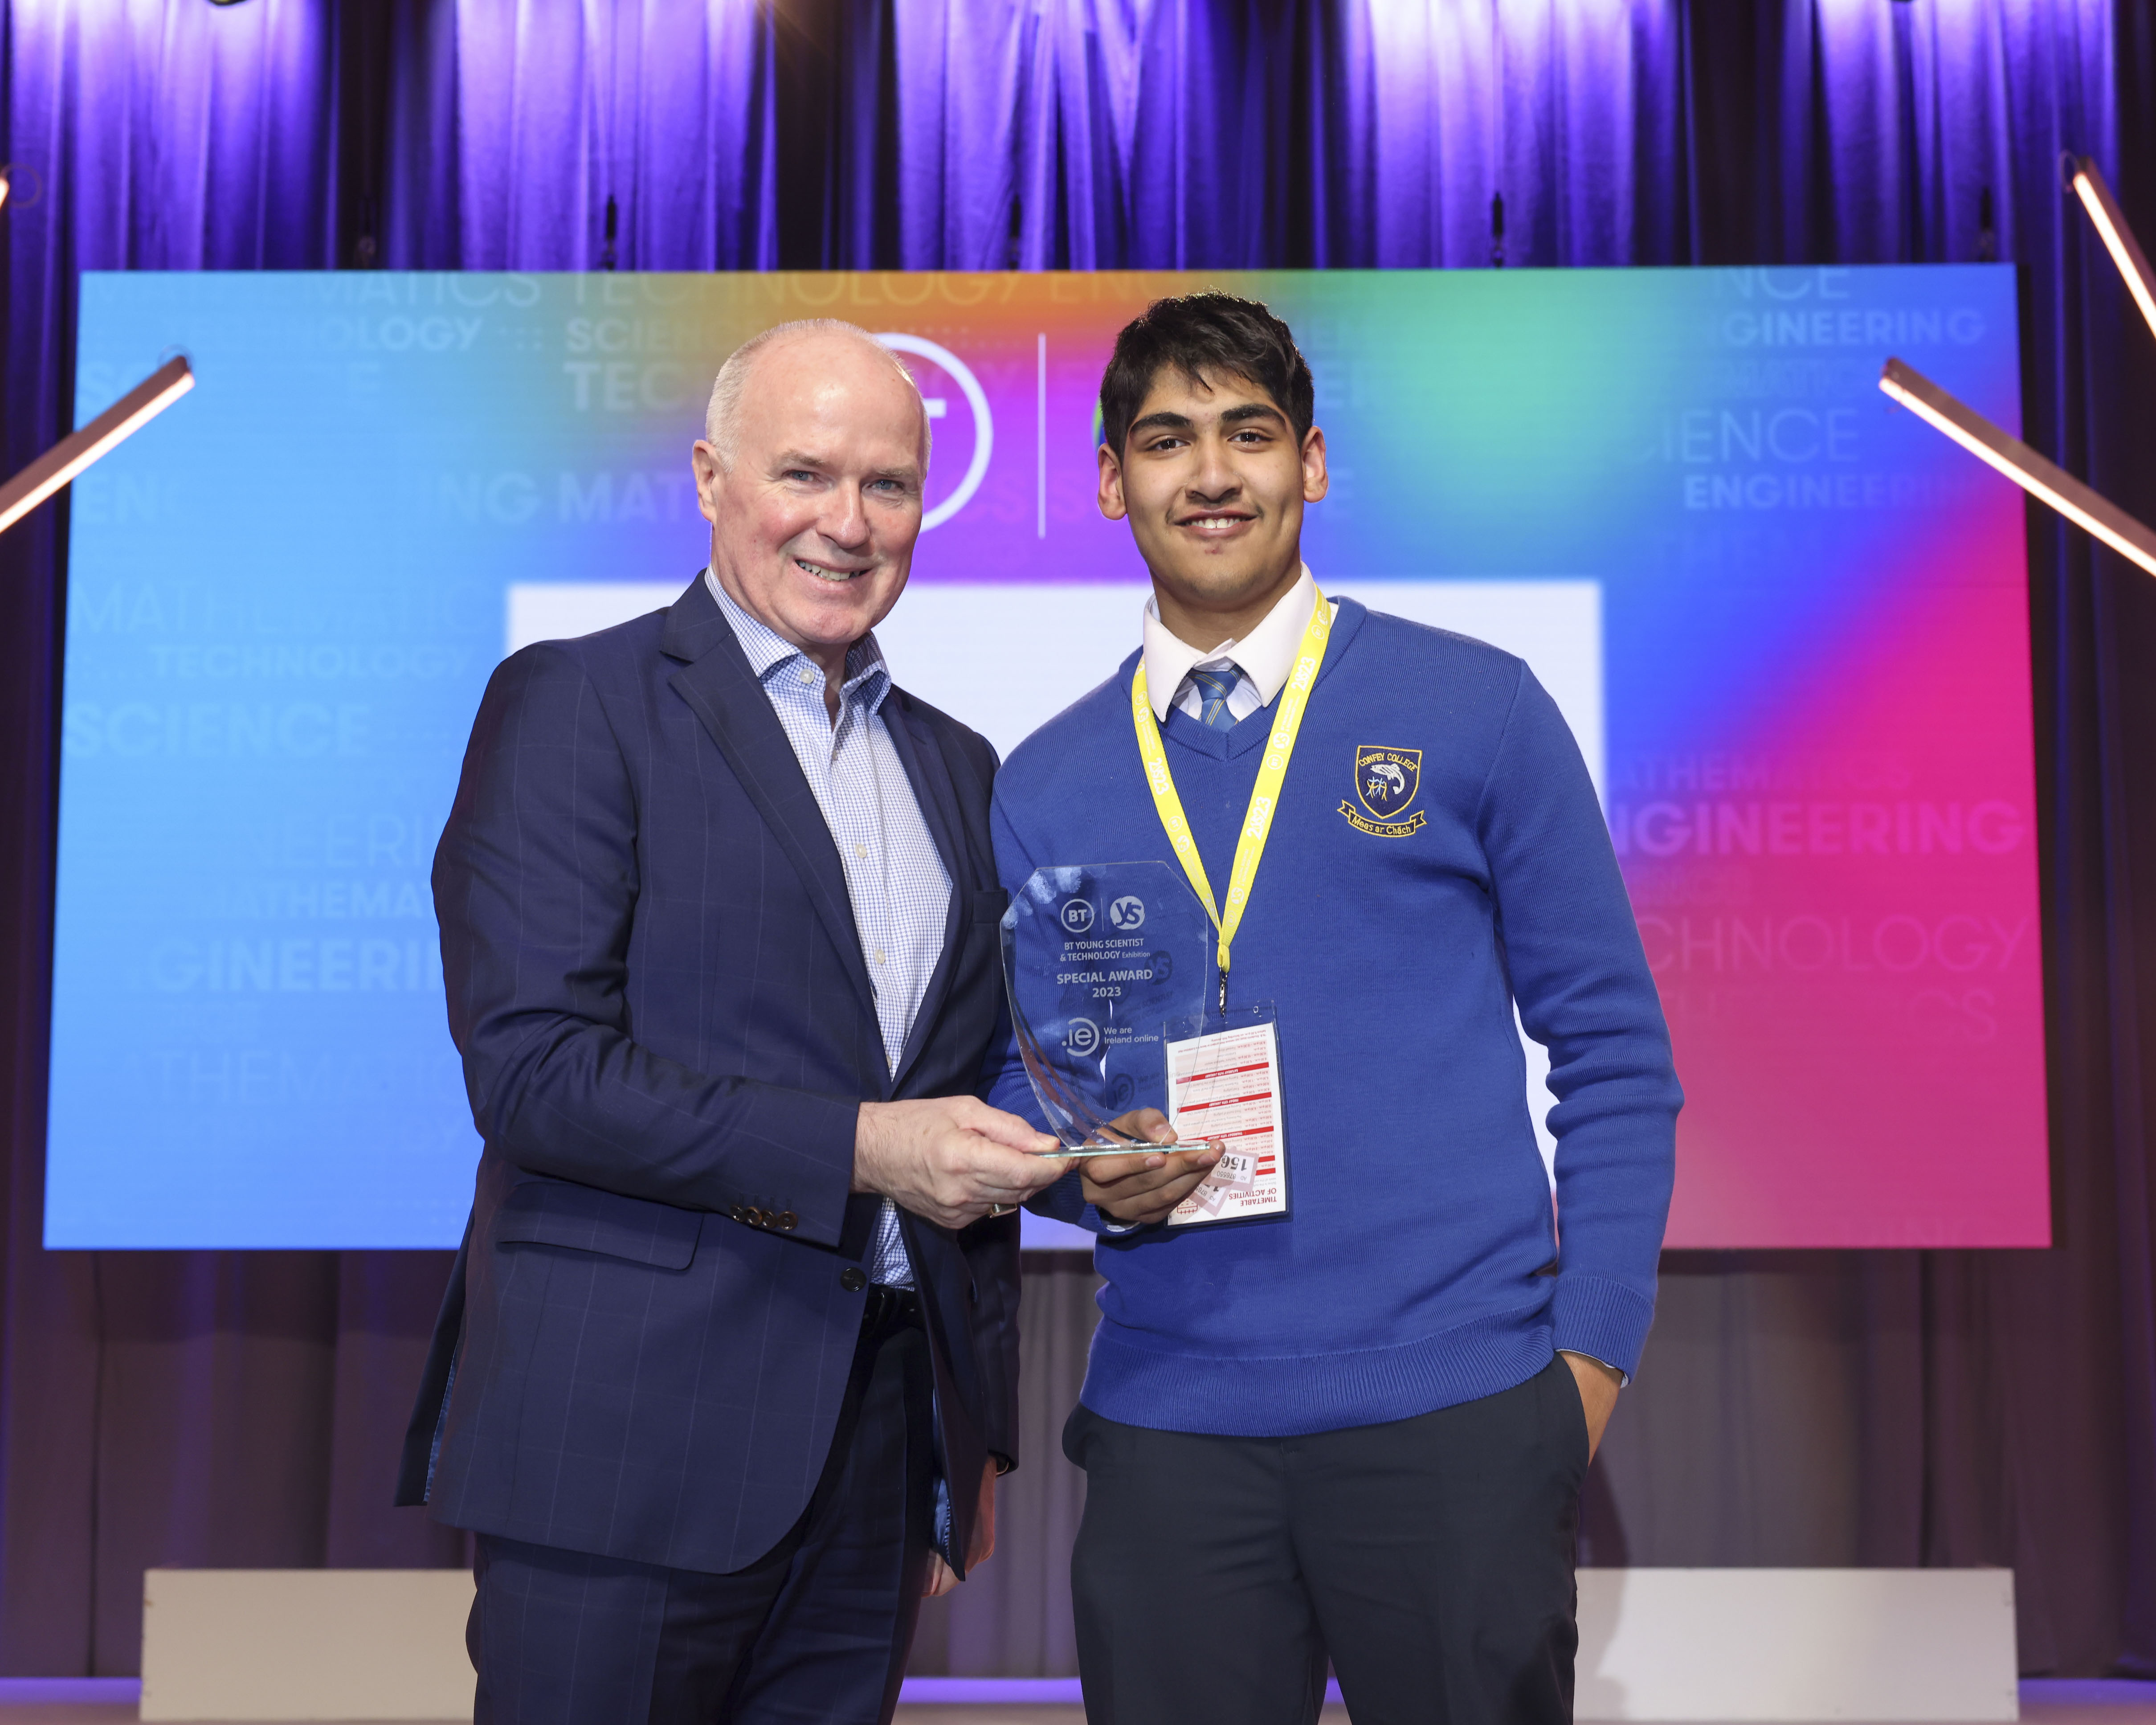 The BT Young Scientist & Technology Exhibition 2023, CEO David Curtin presenting Shaunak Mohapatra from Confey Community College the .IE Special Award.